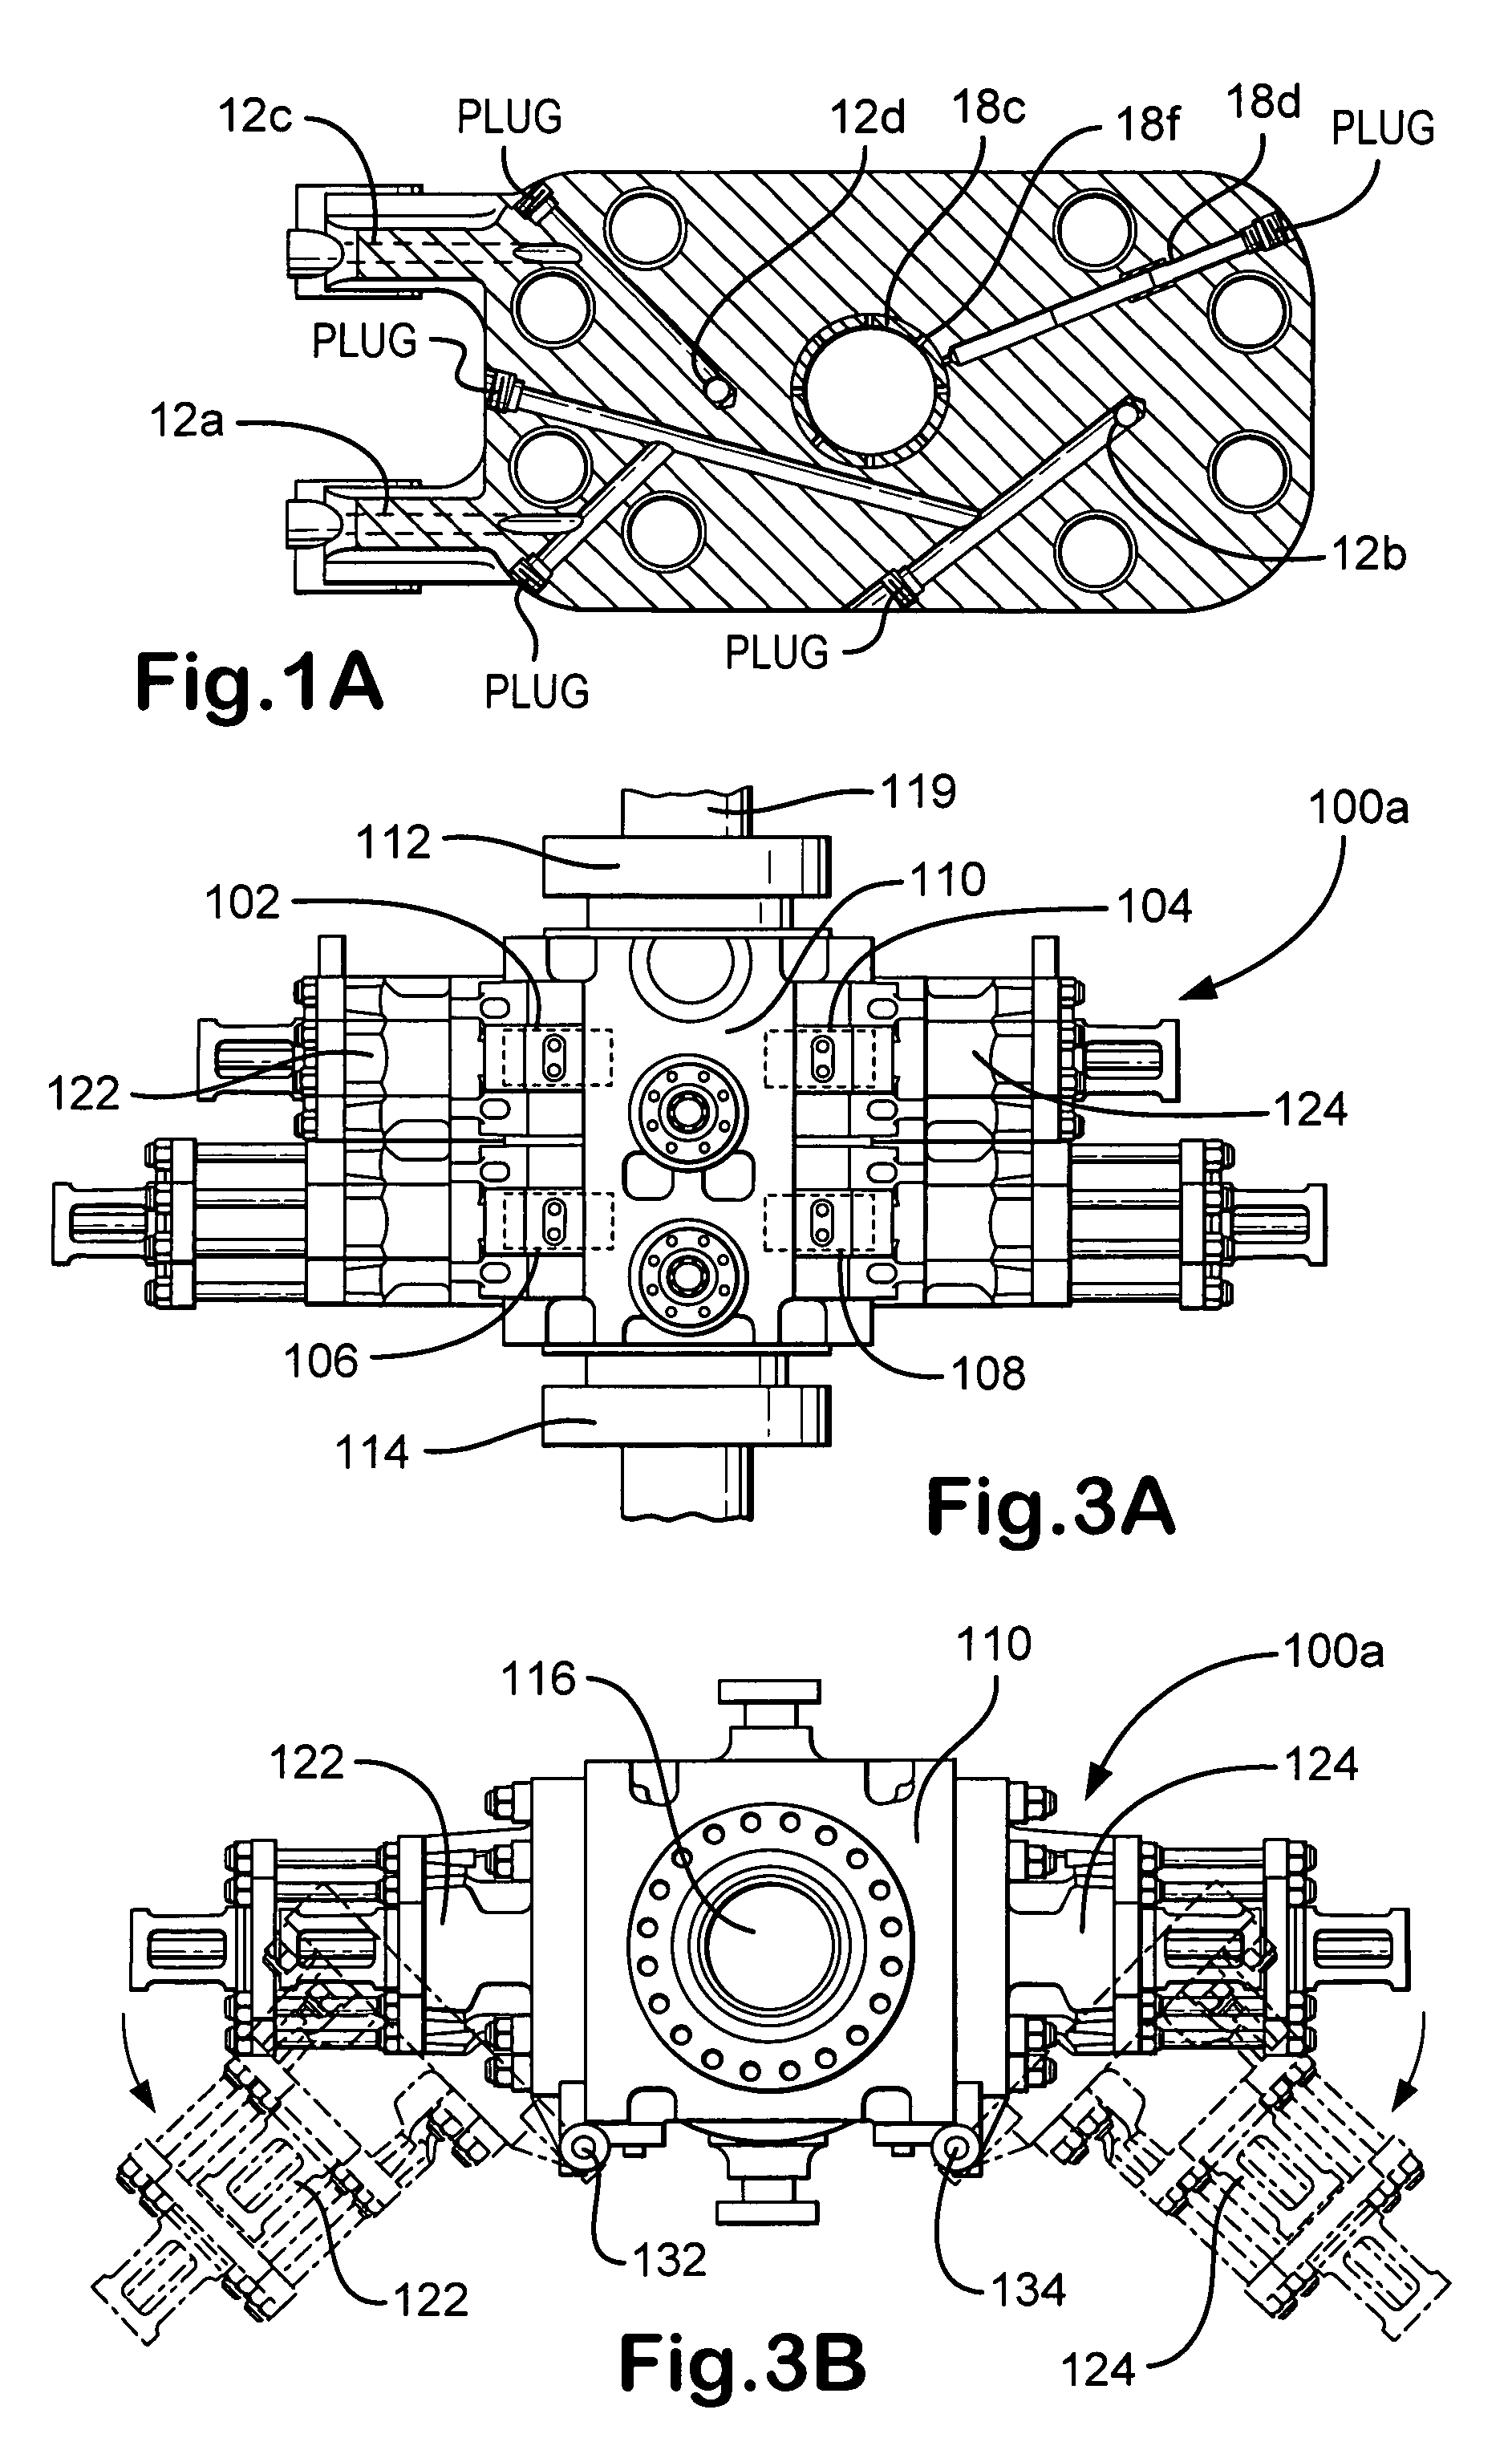 Blowout preventer and ram actuator